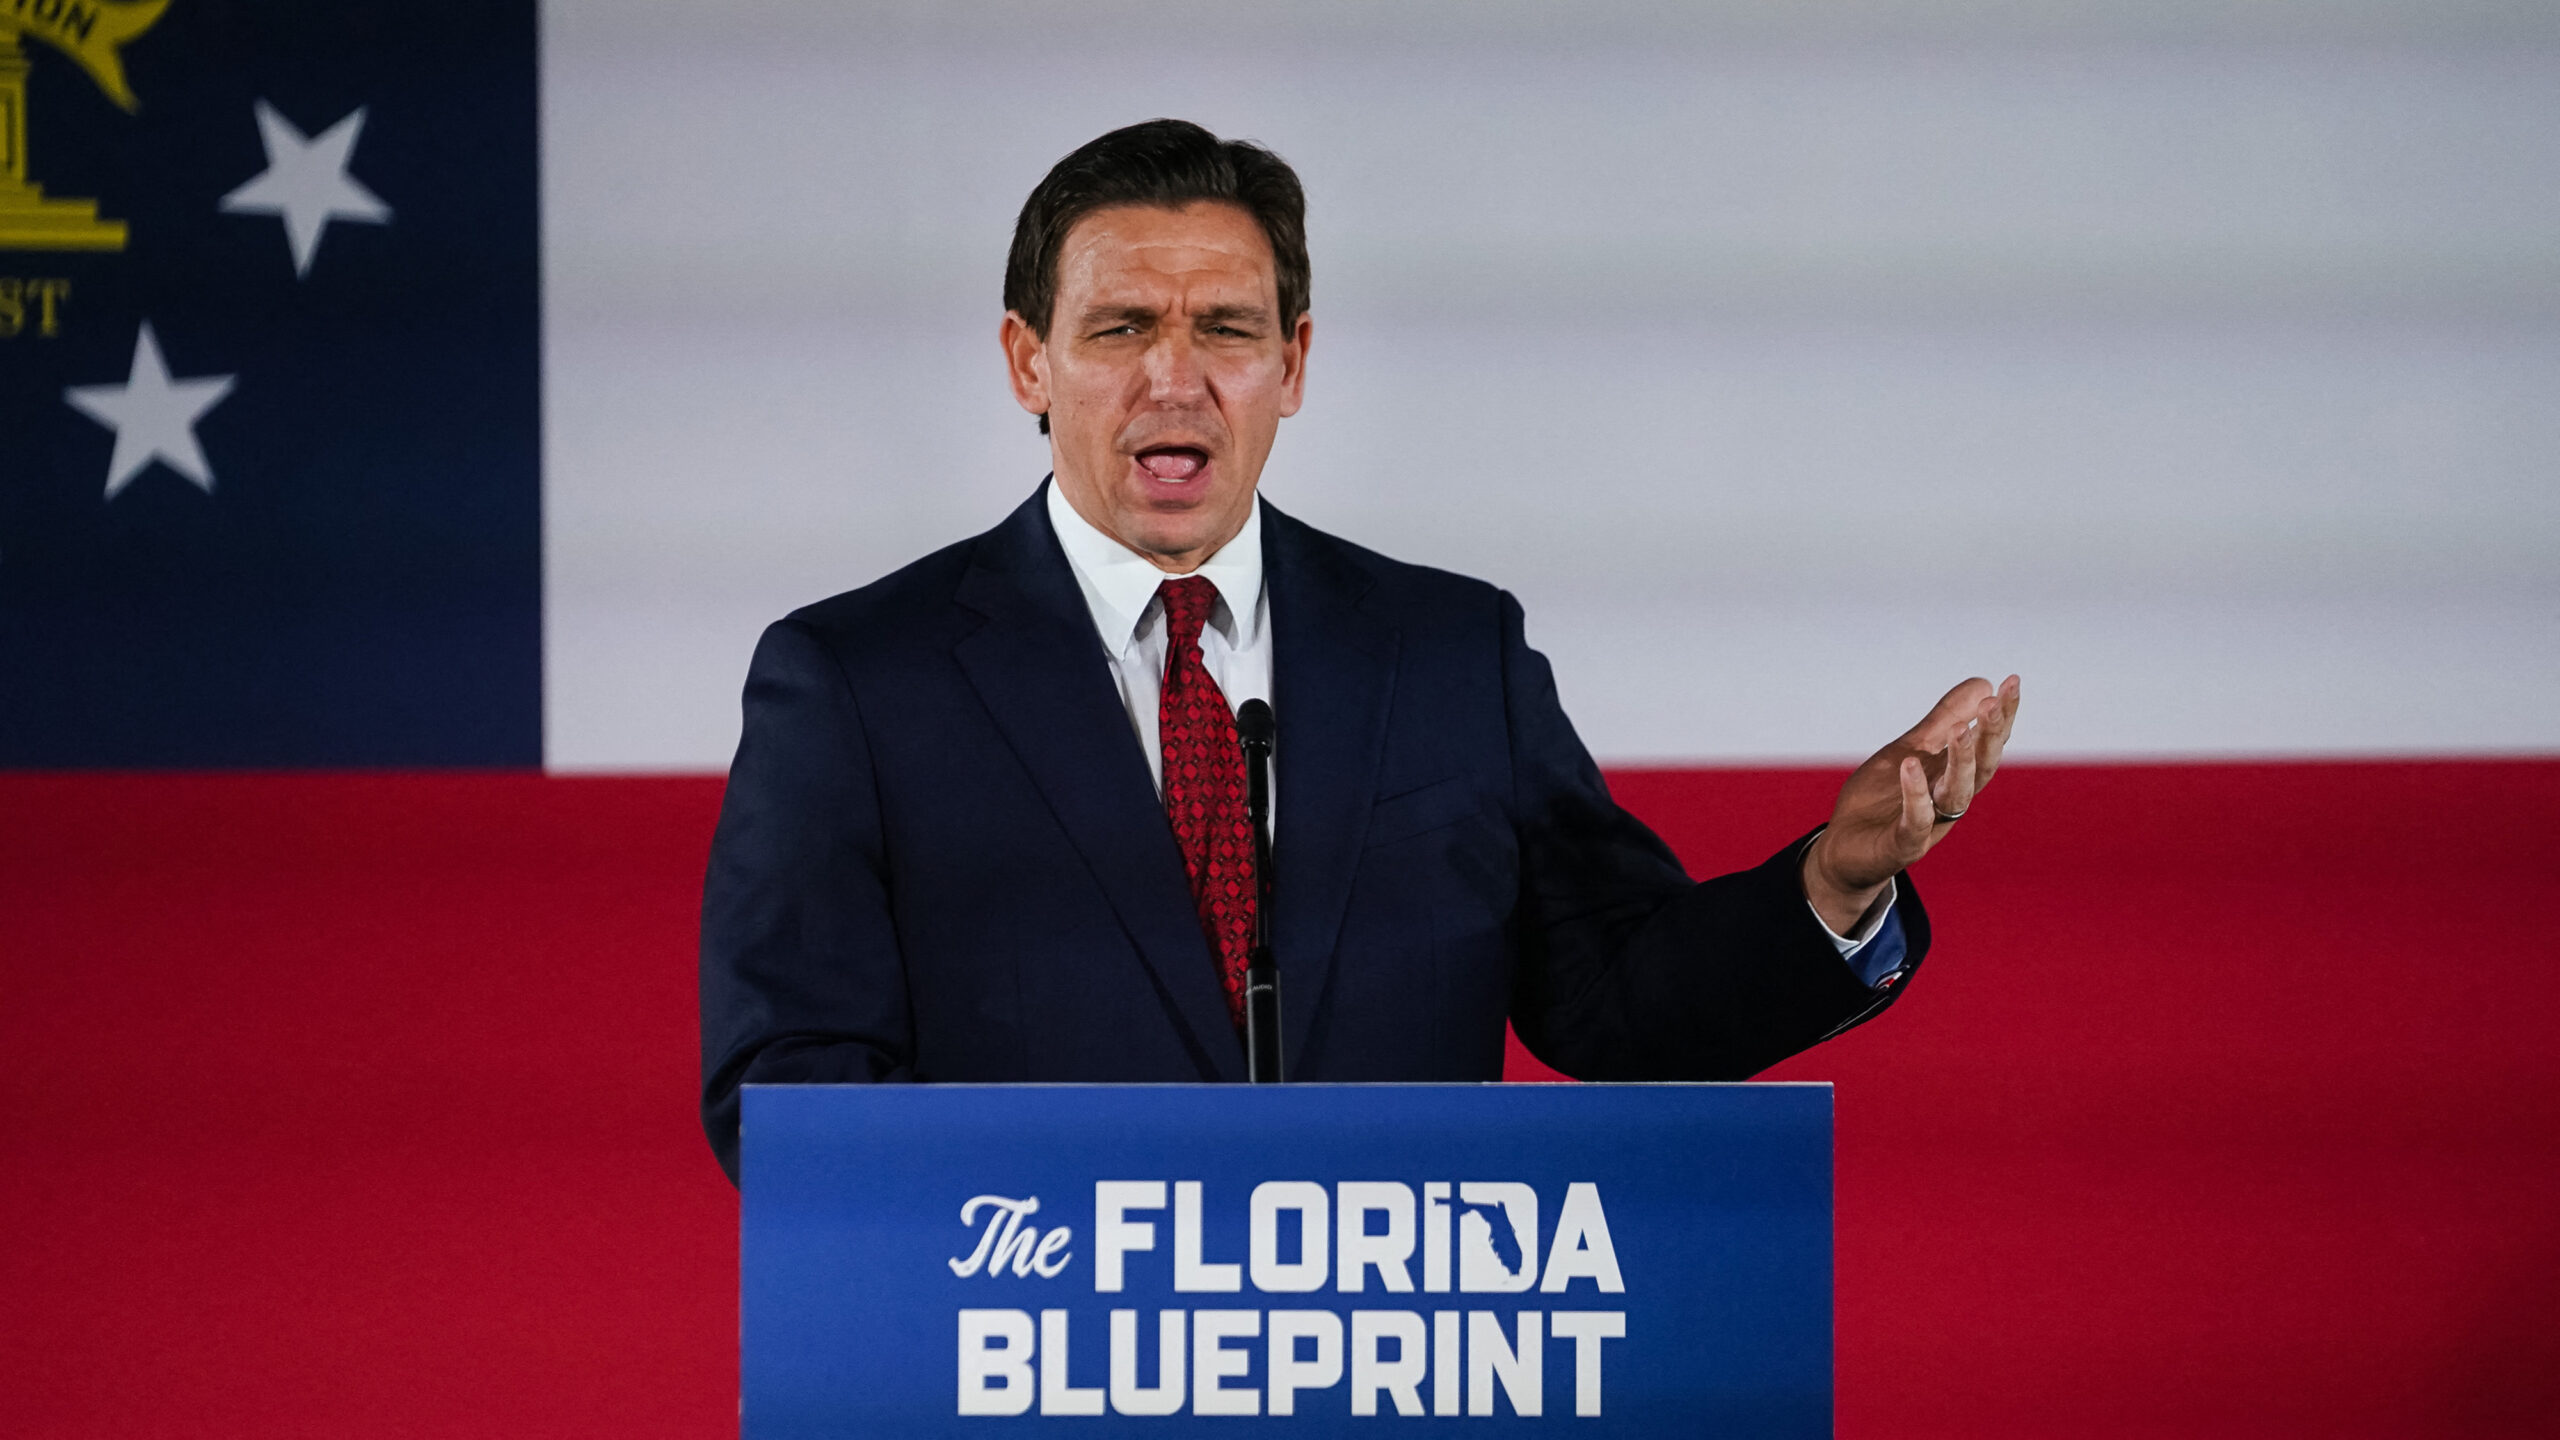 DeSantis Vows Response After Disney’s Latest Action: ‘Rest Assured, You Ain’t Seen Nothing Yet’